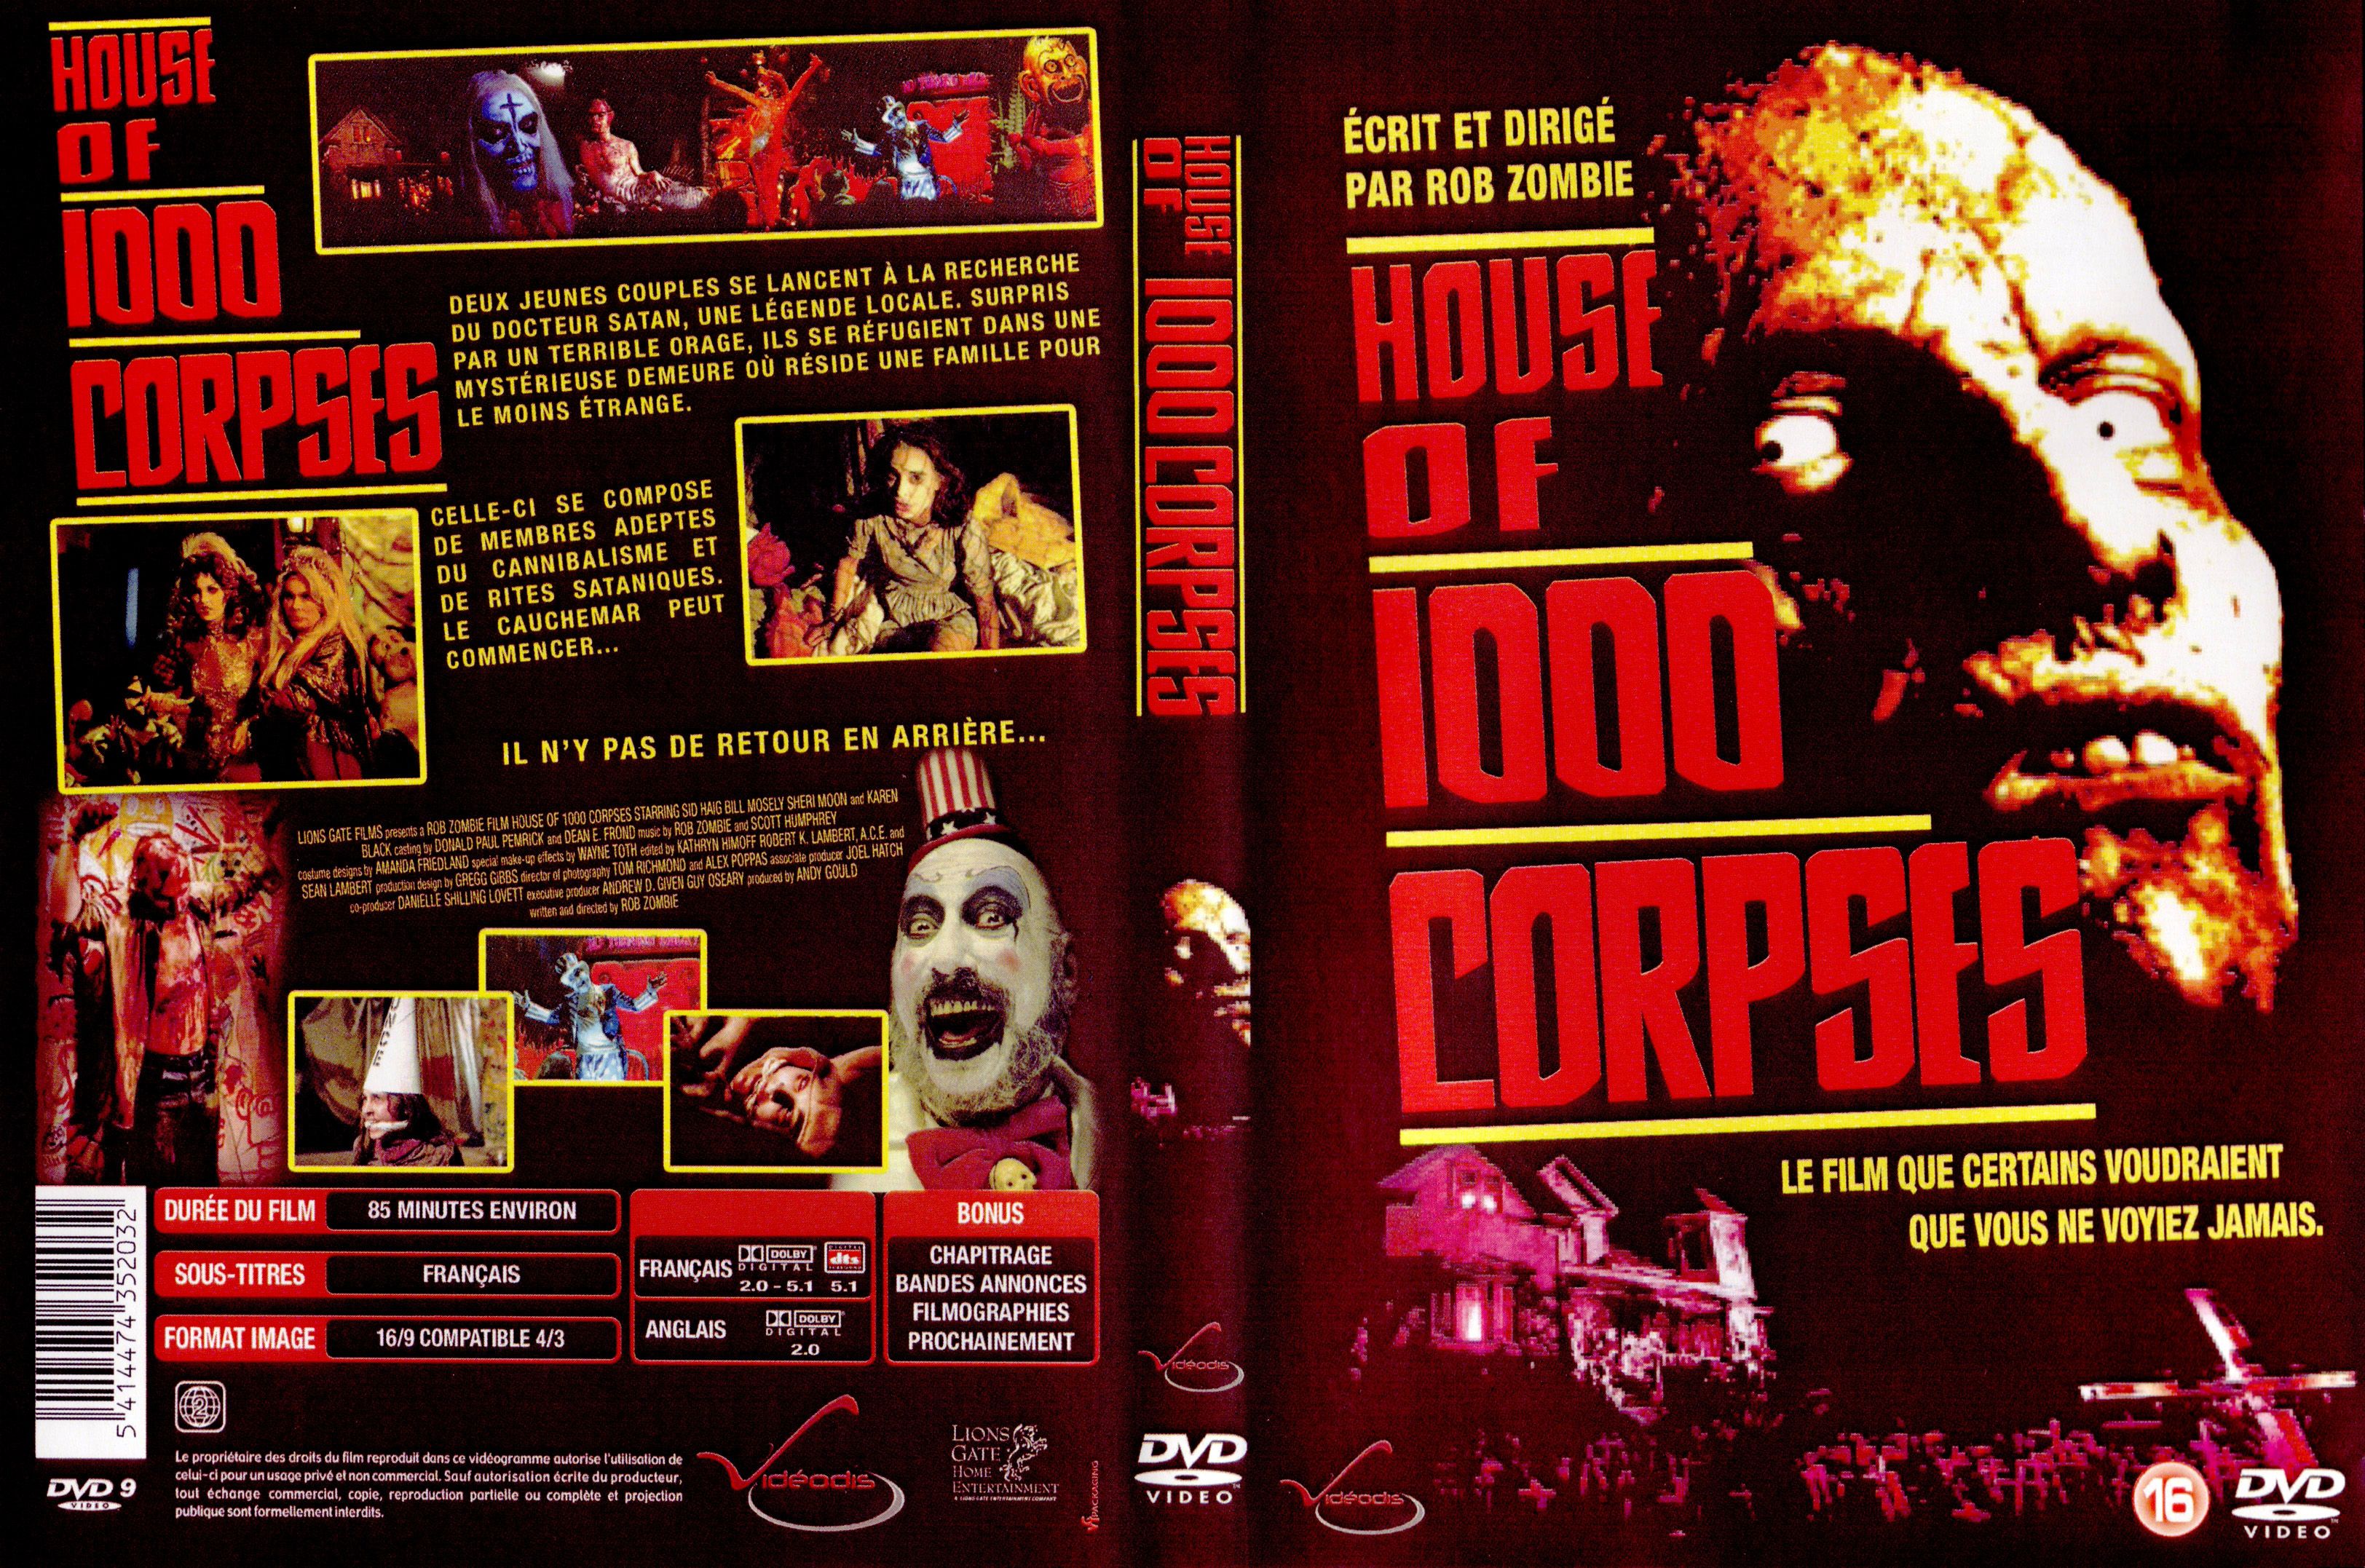 Jaquette DVD House of 1000 corpses